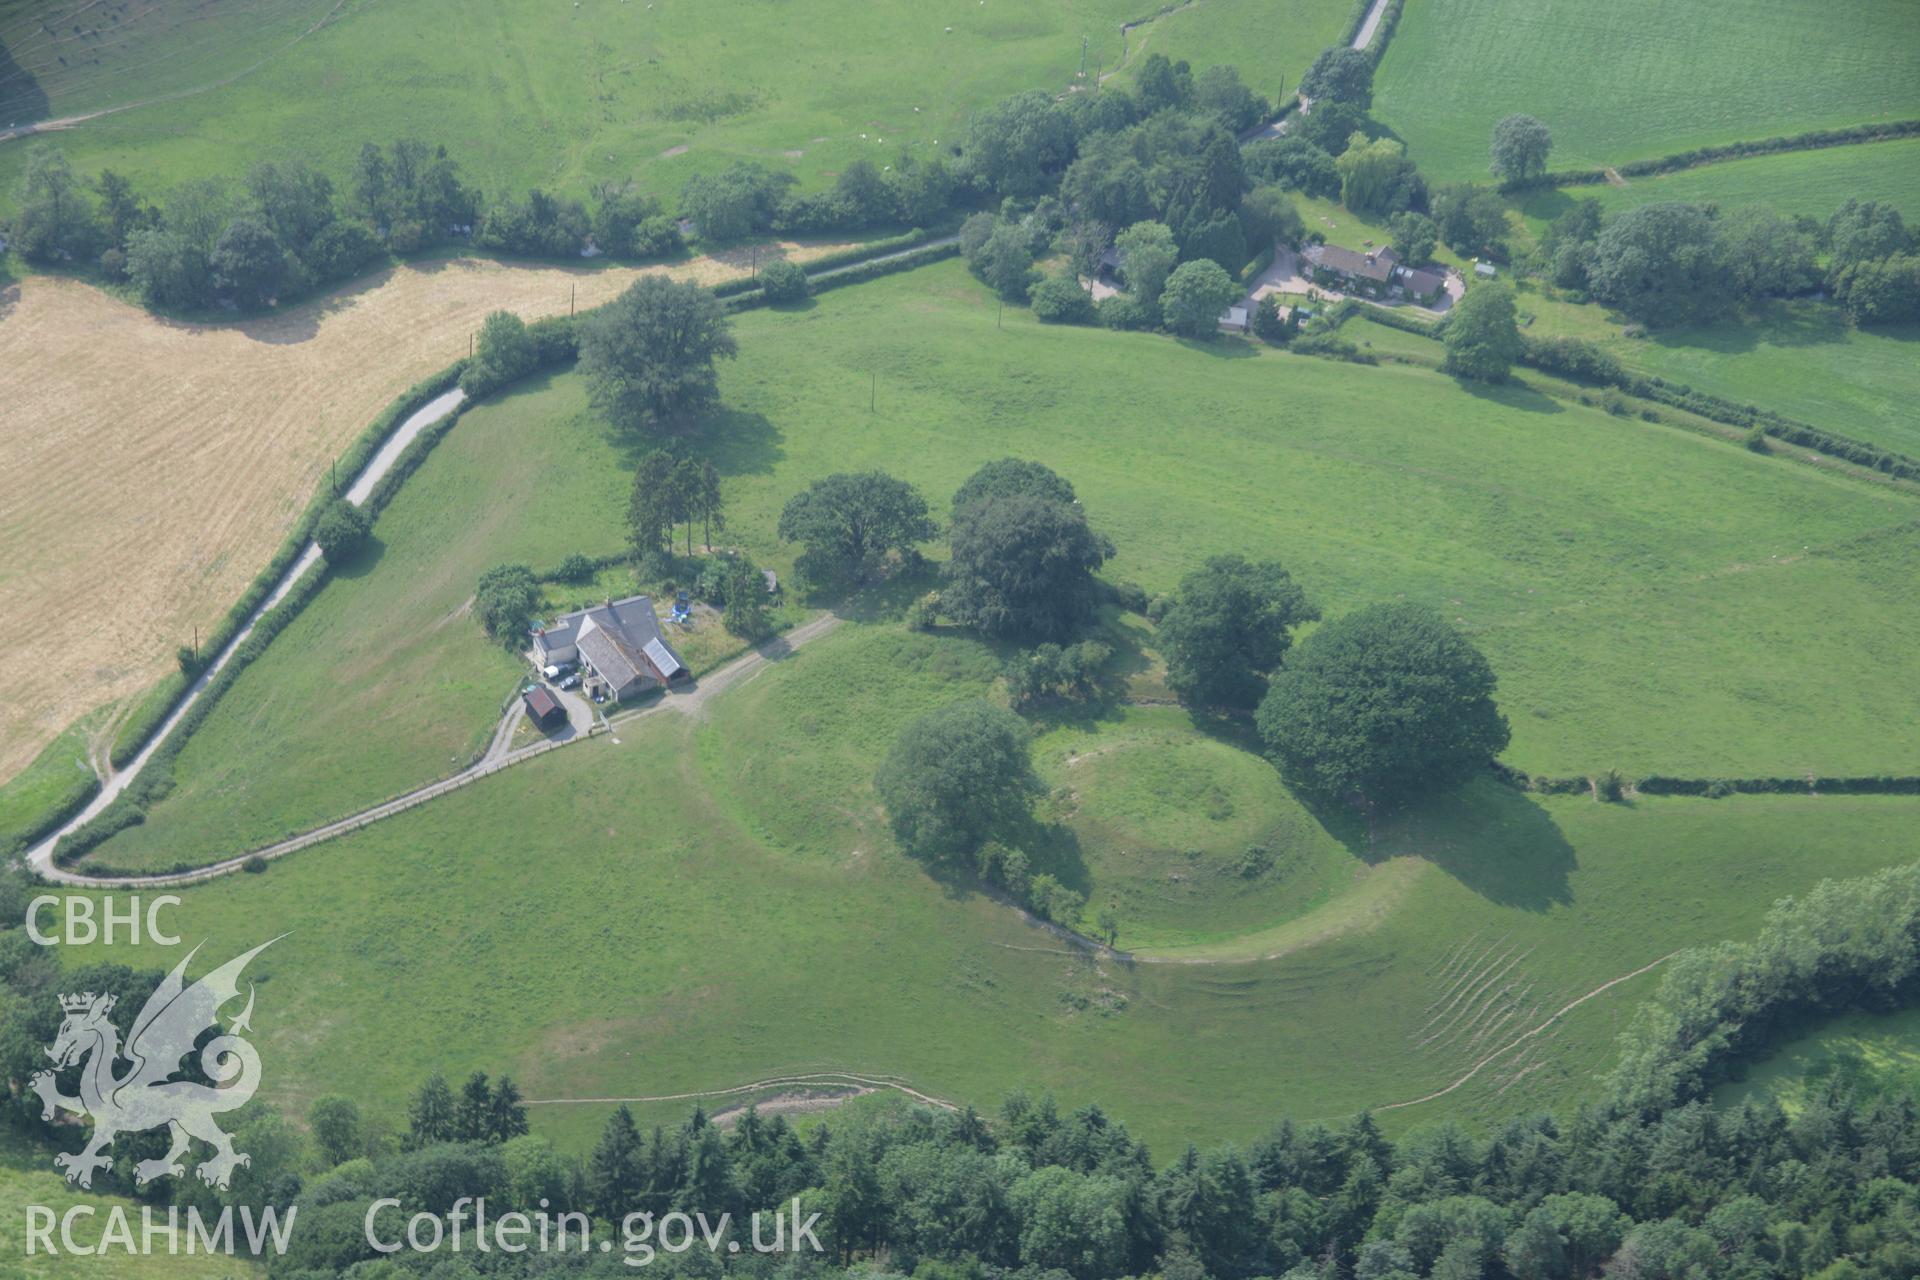 RCAHMW colour oblique aerial photograph of Sycharth Castle, Llansilin. Taken on 04 July 2006 by Toby Driver.